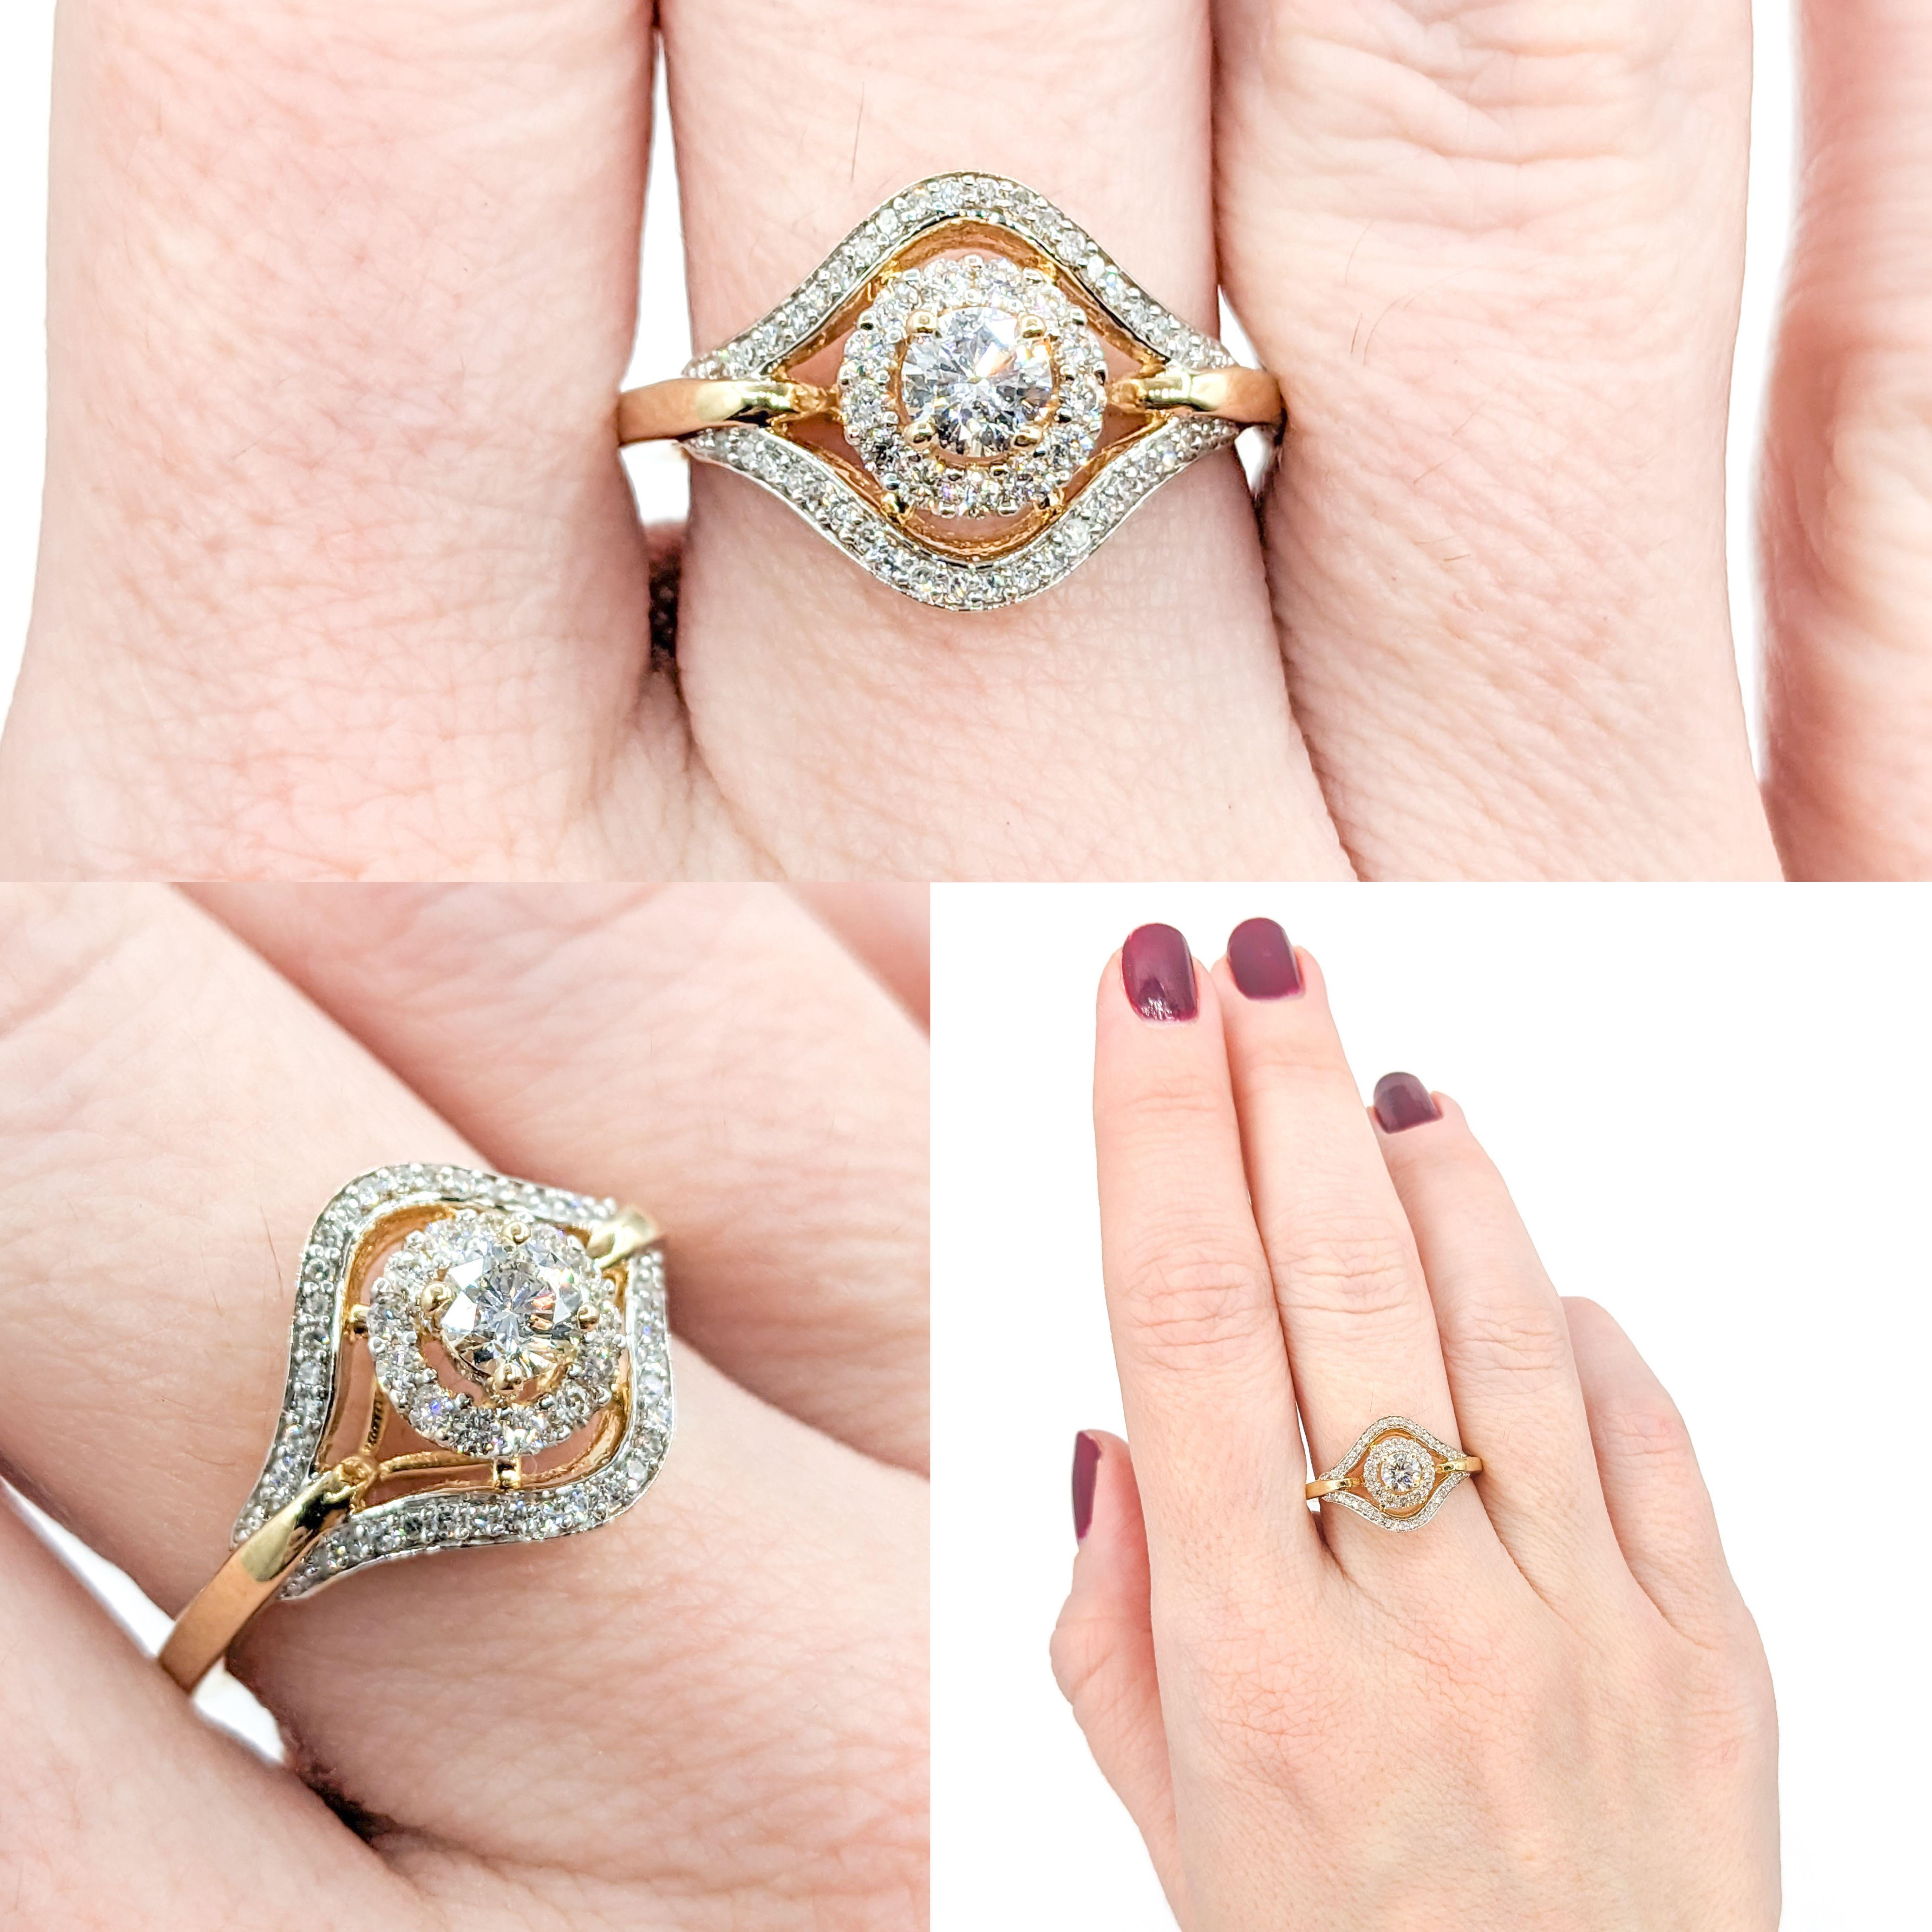 Diamond Halo Engagement Ring in Gold

Introducing this stunning vintage Diamond Ring, a perfect blend of elegance and radiance. This beautiful piece is crafted in 10k yellow gold, known for its durability and warm luster. Central to its design, the